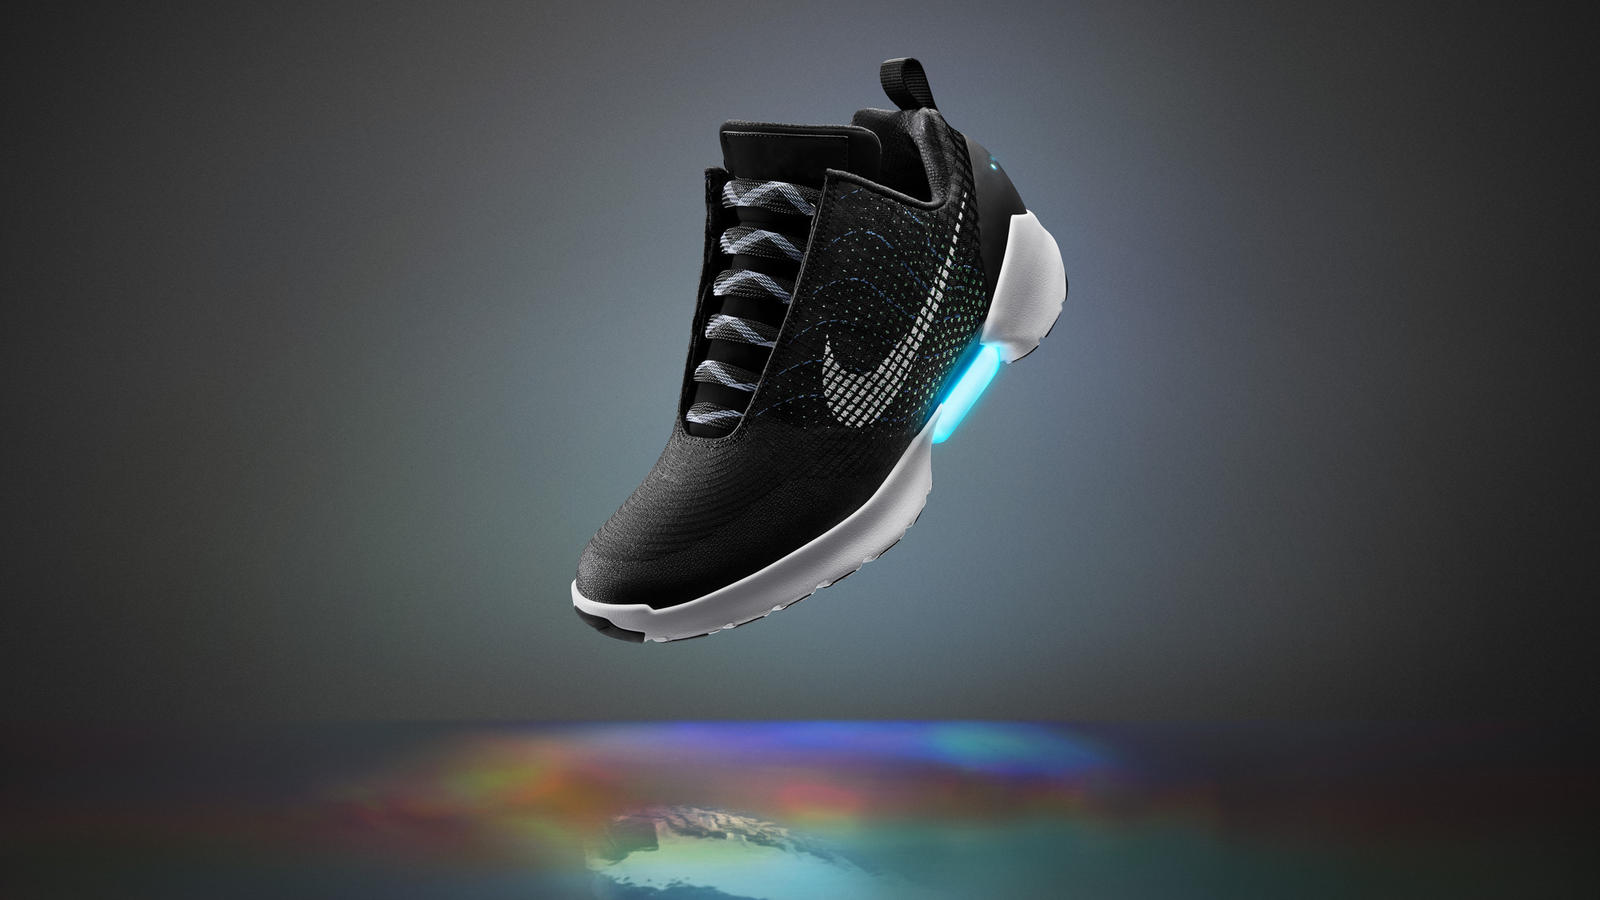 The Hyperadapt 1.0 – Nike’s self-lacing trainers